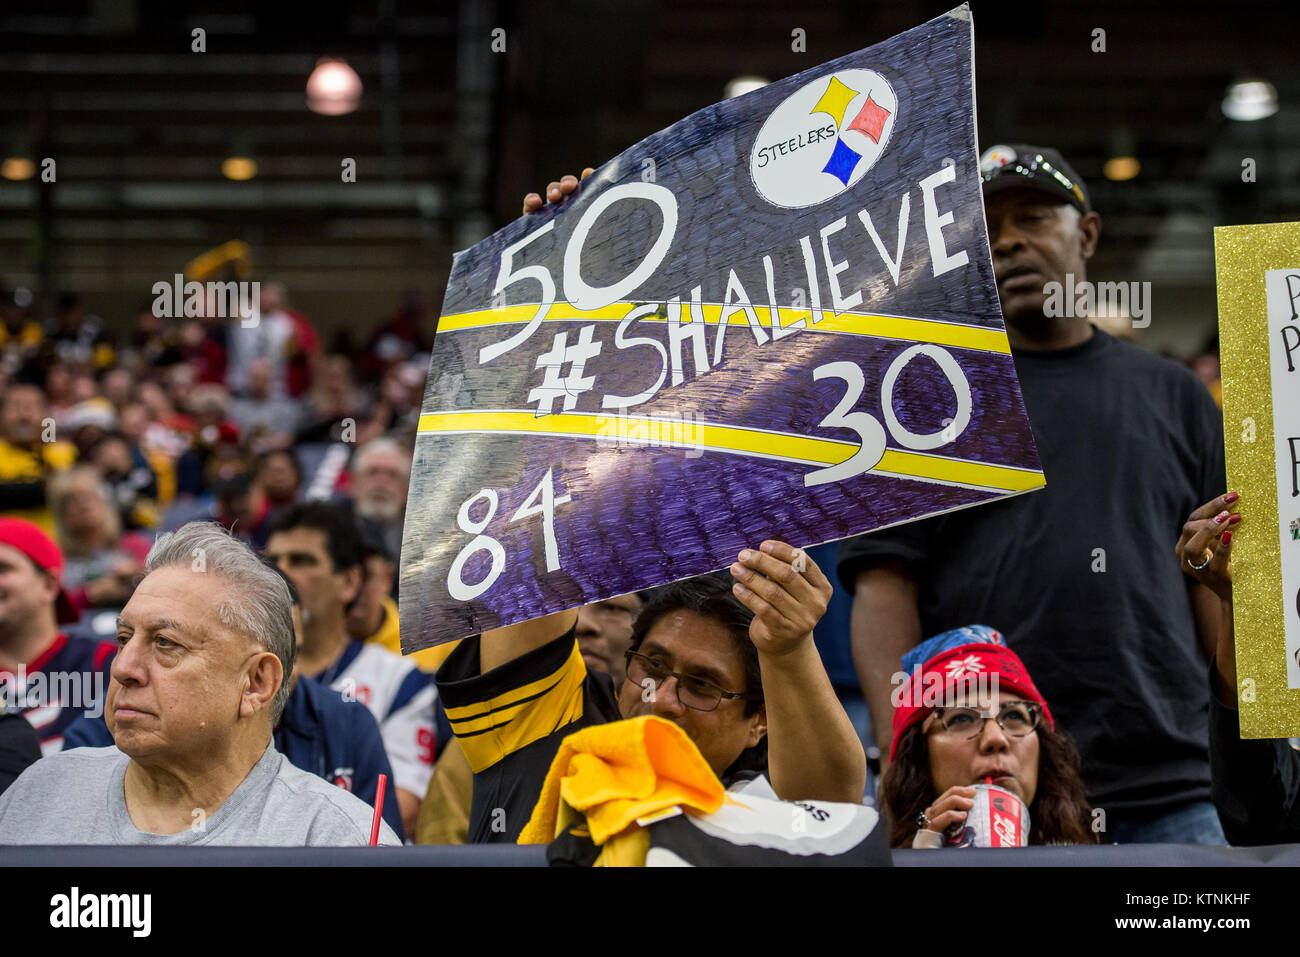 Houston, TX, USA. 25th Dec, 2017. A Pittsburgh Steelers fan holds up a Shalieve sign for injured linebacker Ryan Shazier (50) prior to an NFL football game between the Houston Texans and the Pittsburgh Steelers at NRG Stadium in Houston, TX. The Steelers won the game 34 to 6.Trask Smith/CSM/Alamy Live News Stock Photo